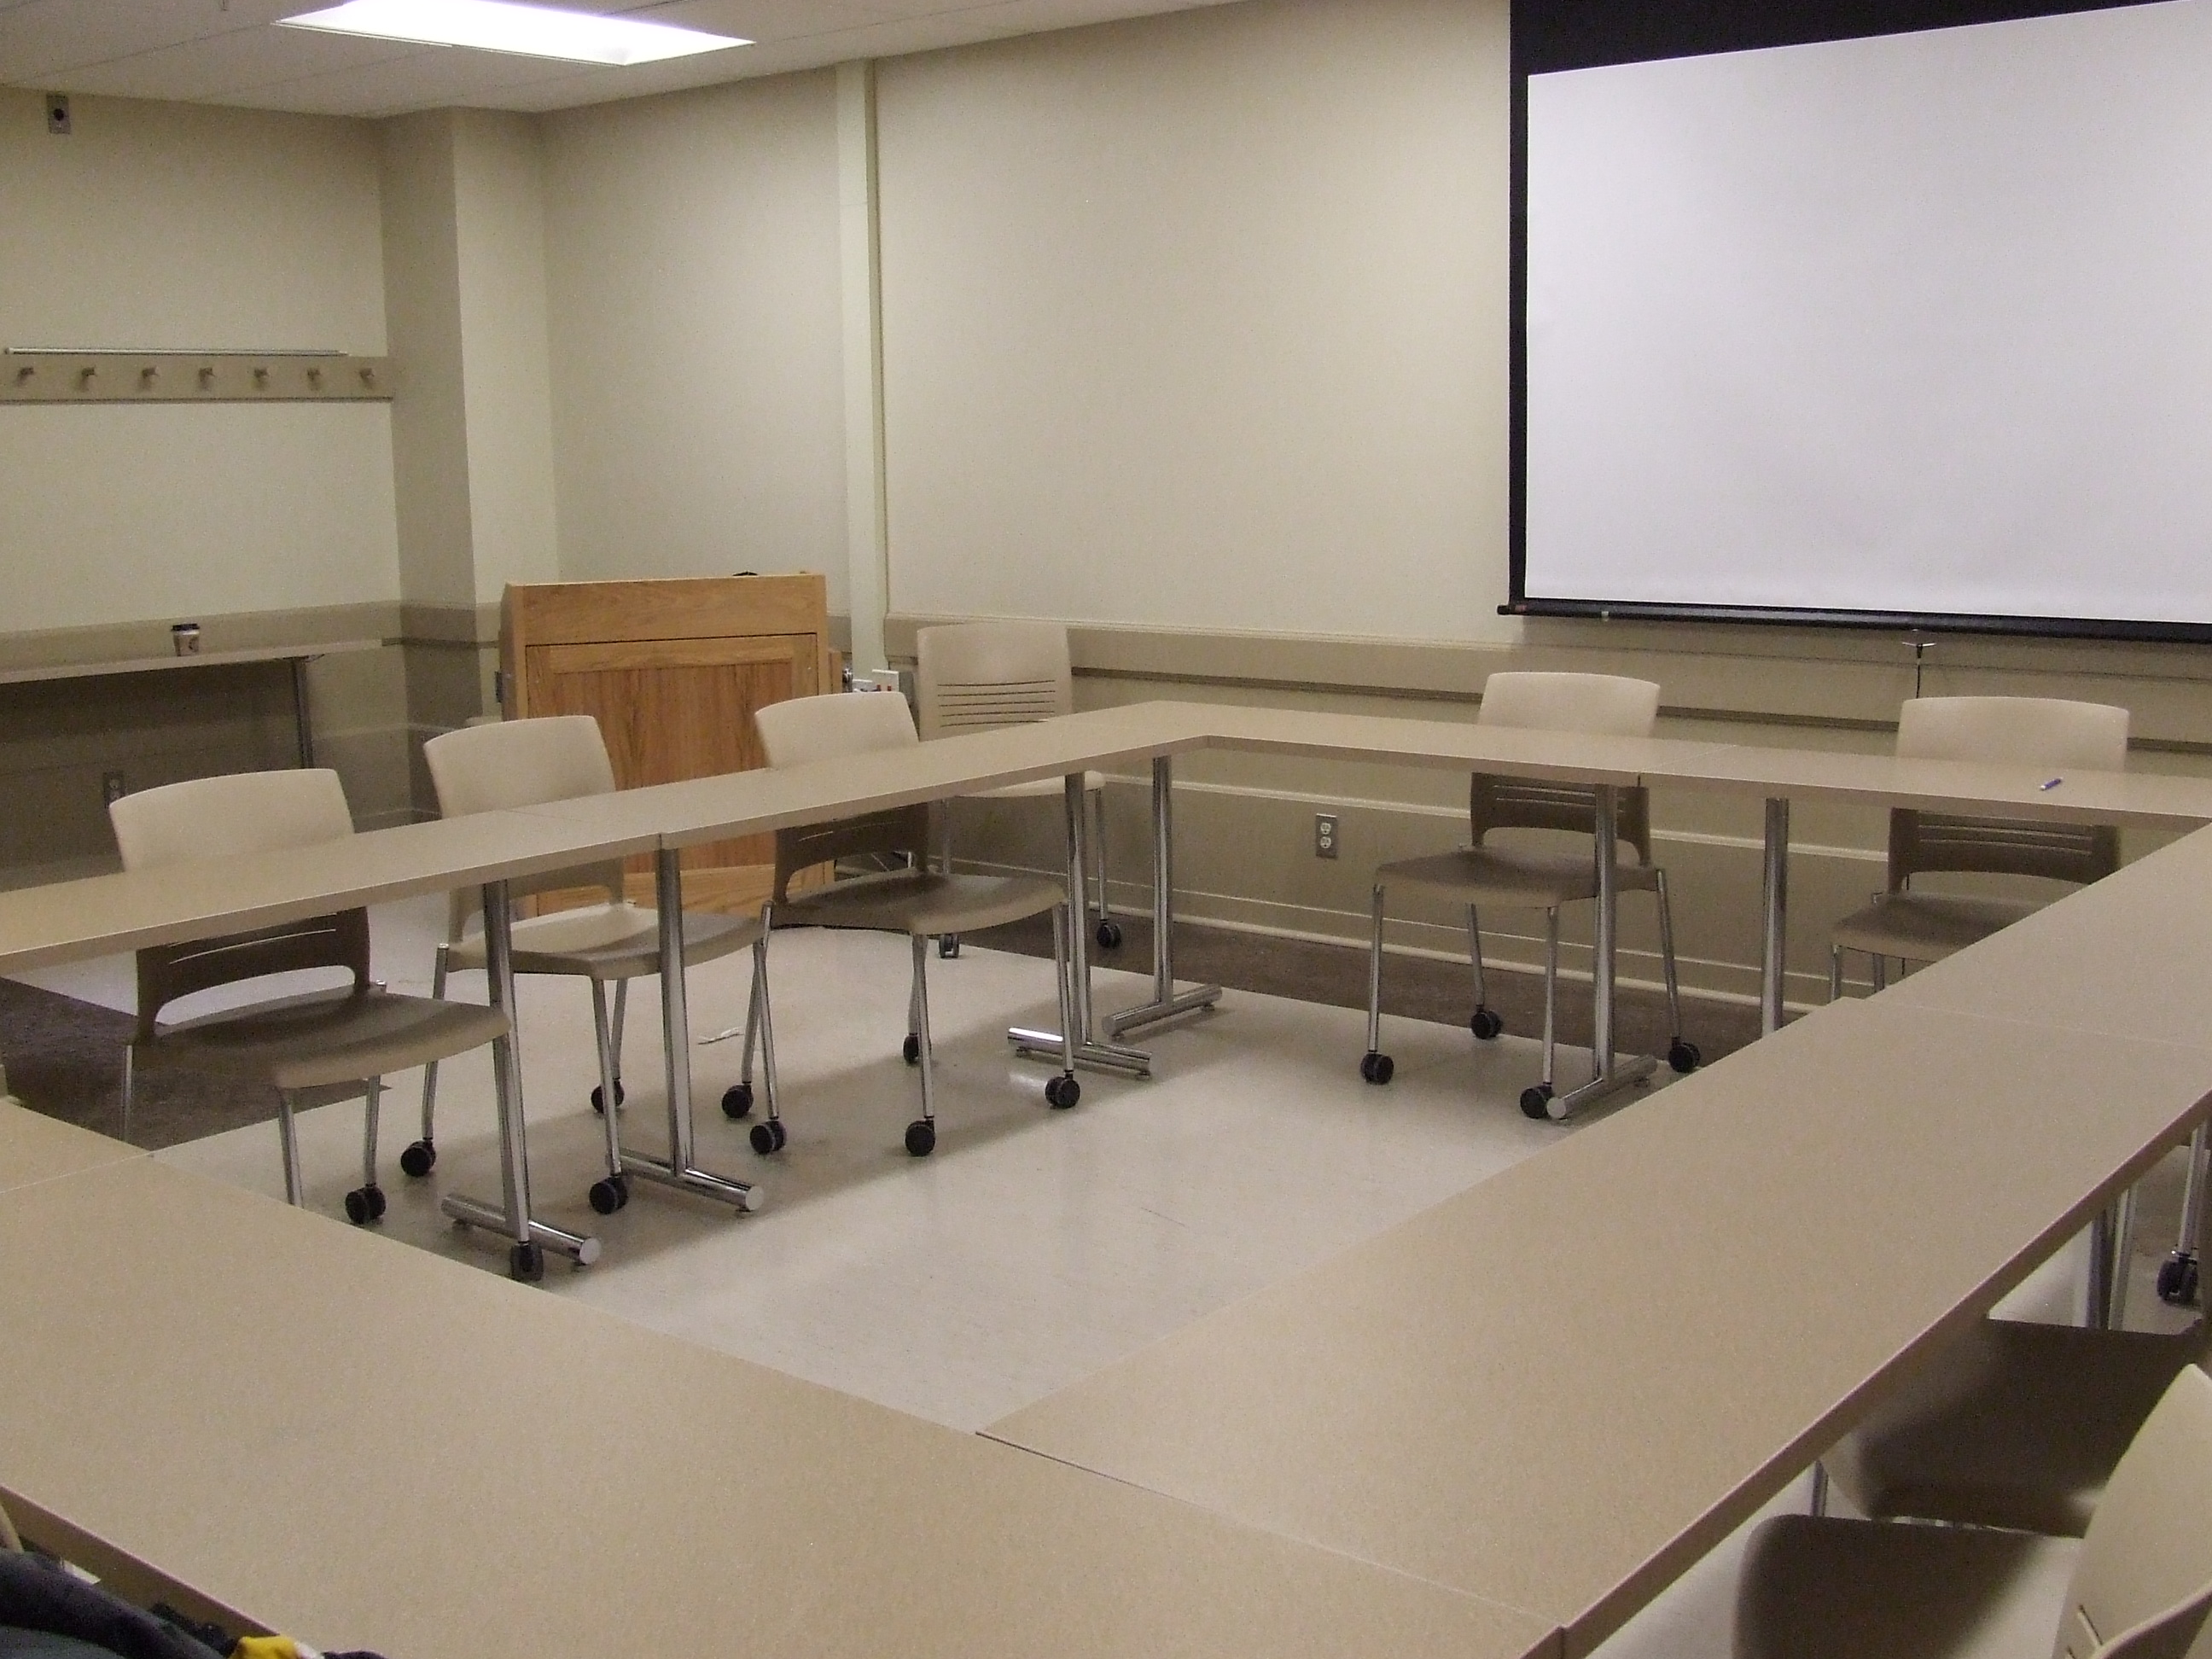 A view of the classroom with movable tables and chairs and instructor table in front.